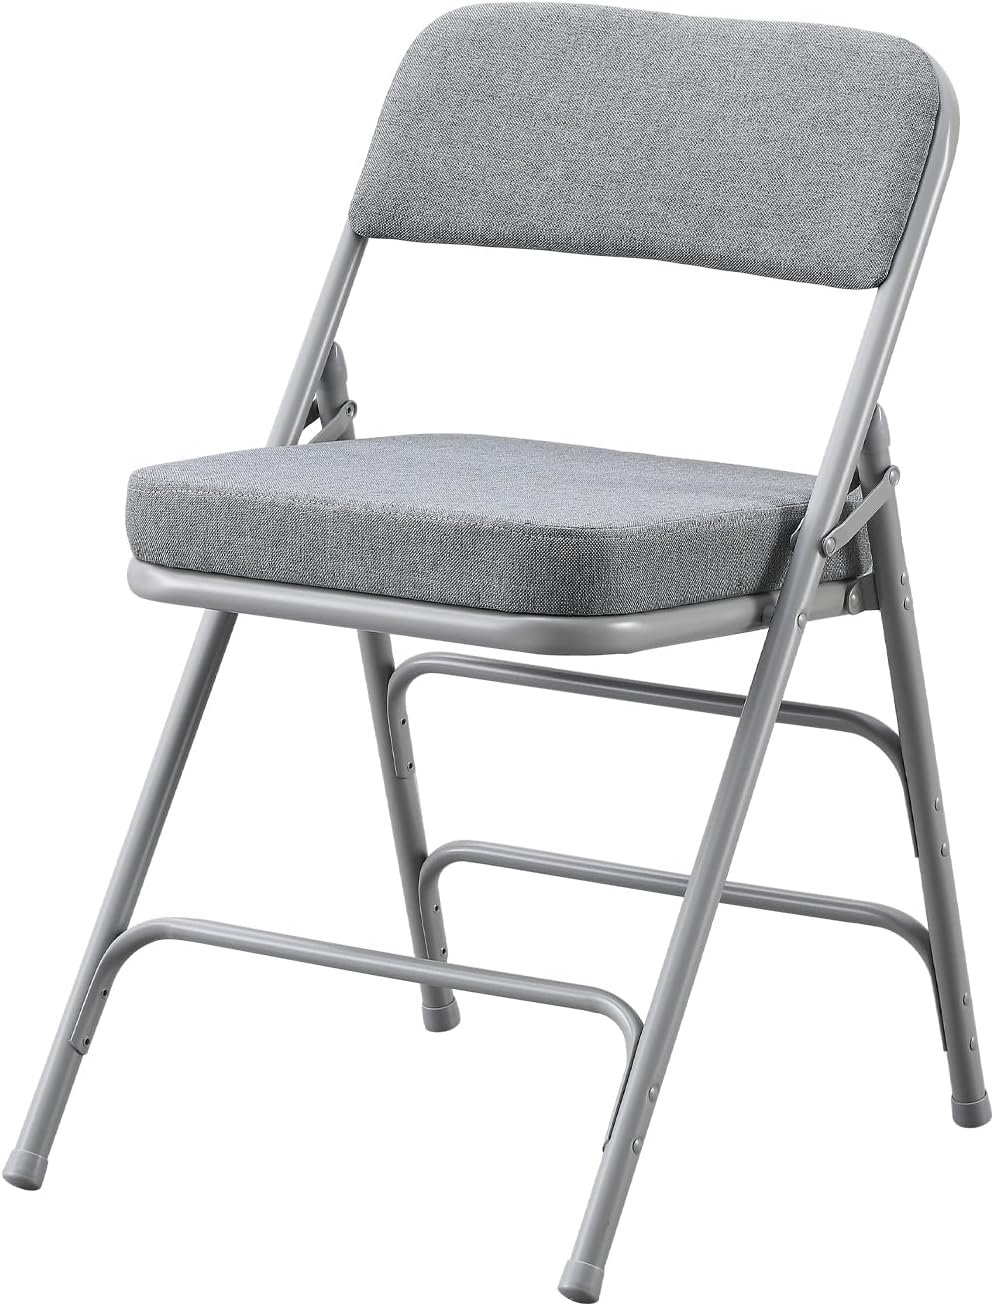 KAIHAOWIN Folding Chairs Review